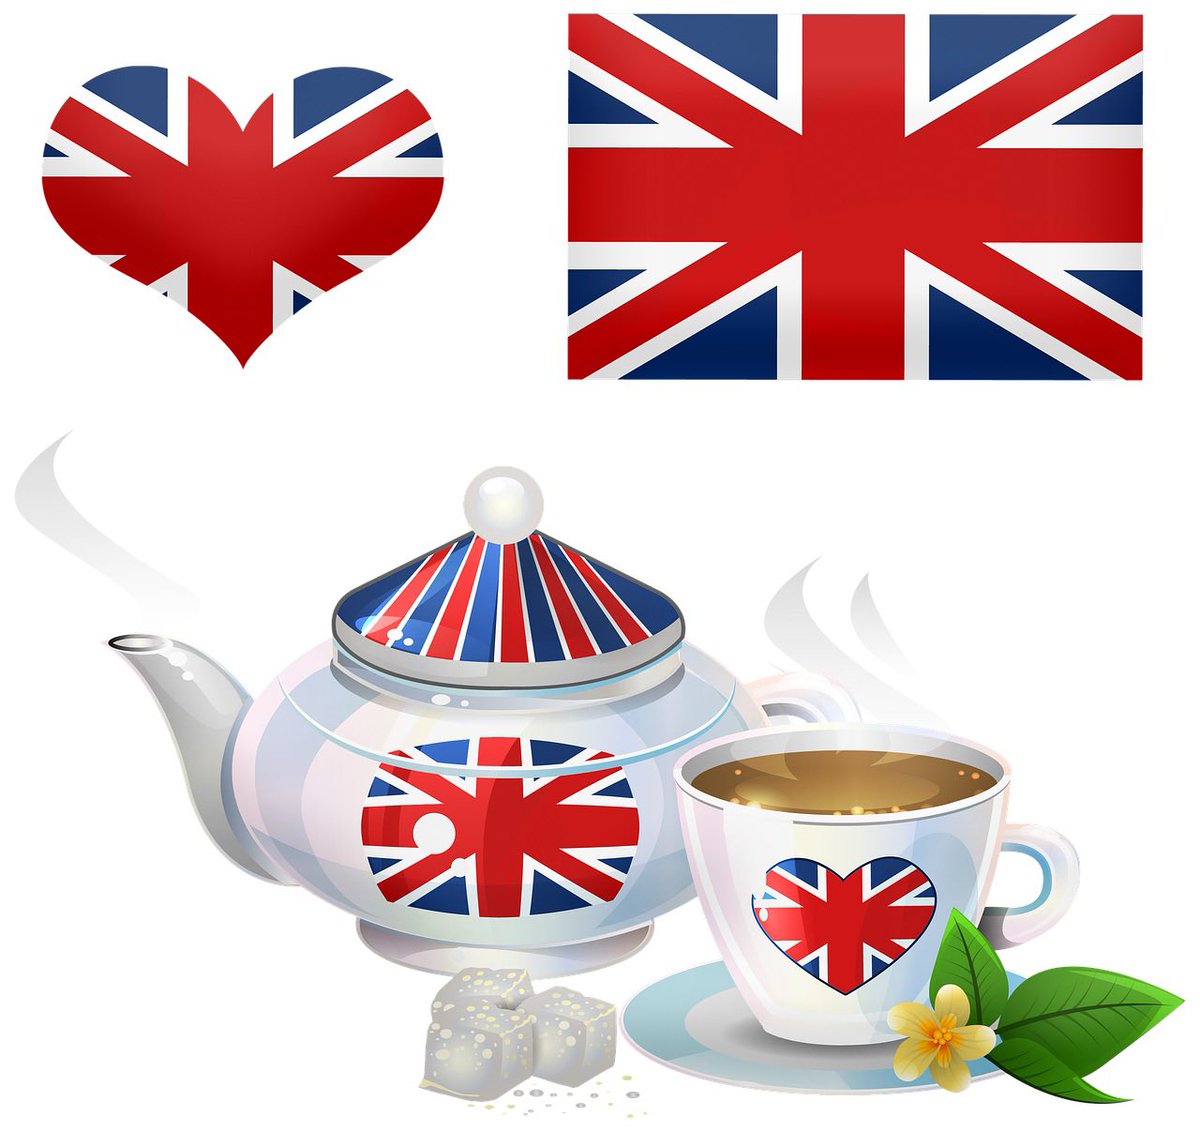 Planning a #coronation tea party? Head to Berecombe, the little #devon town with the big heart for top tips!

mybook.to/SummerStreet1

#BookRecommendation #RomanceReaders #greatreads #BankHolidayWeekend #BankHolidayReading #romancebooks ❤️